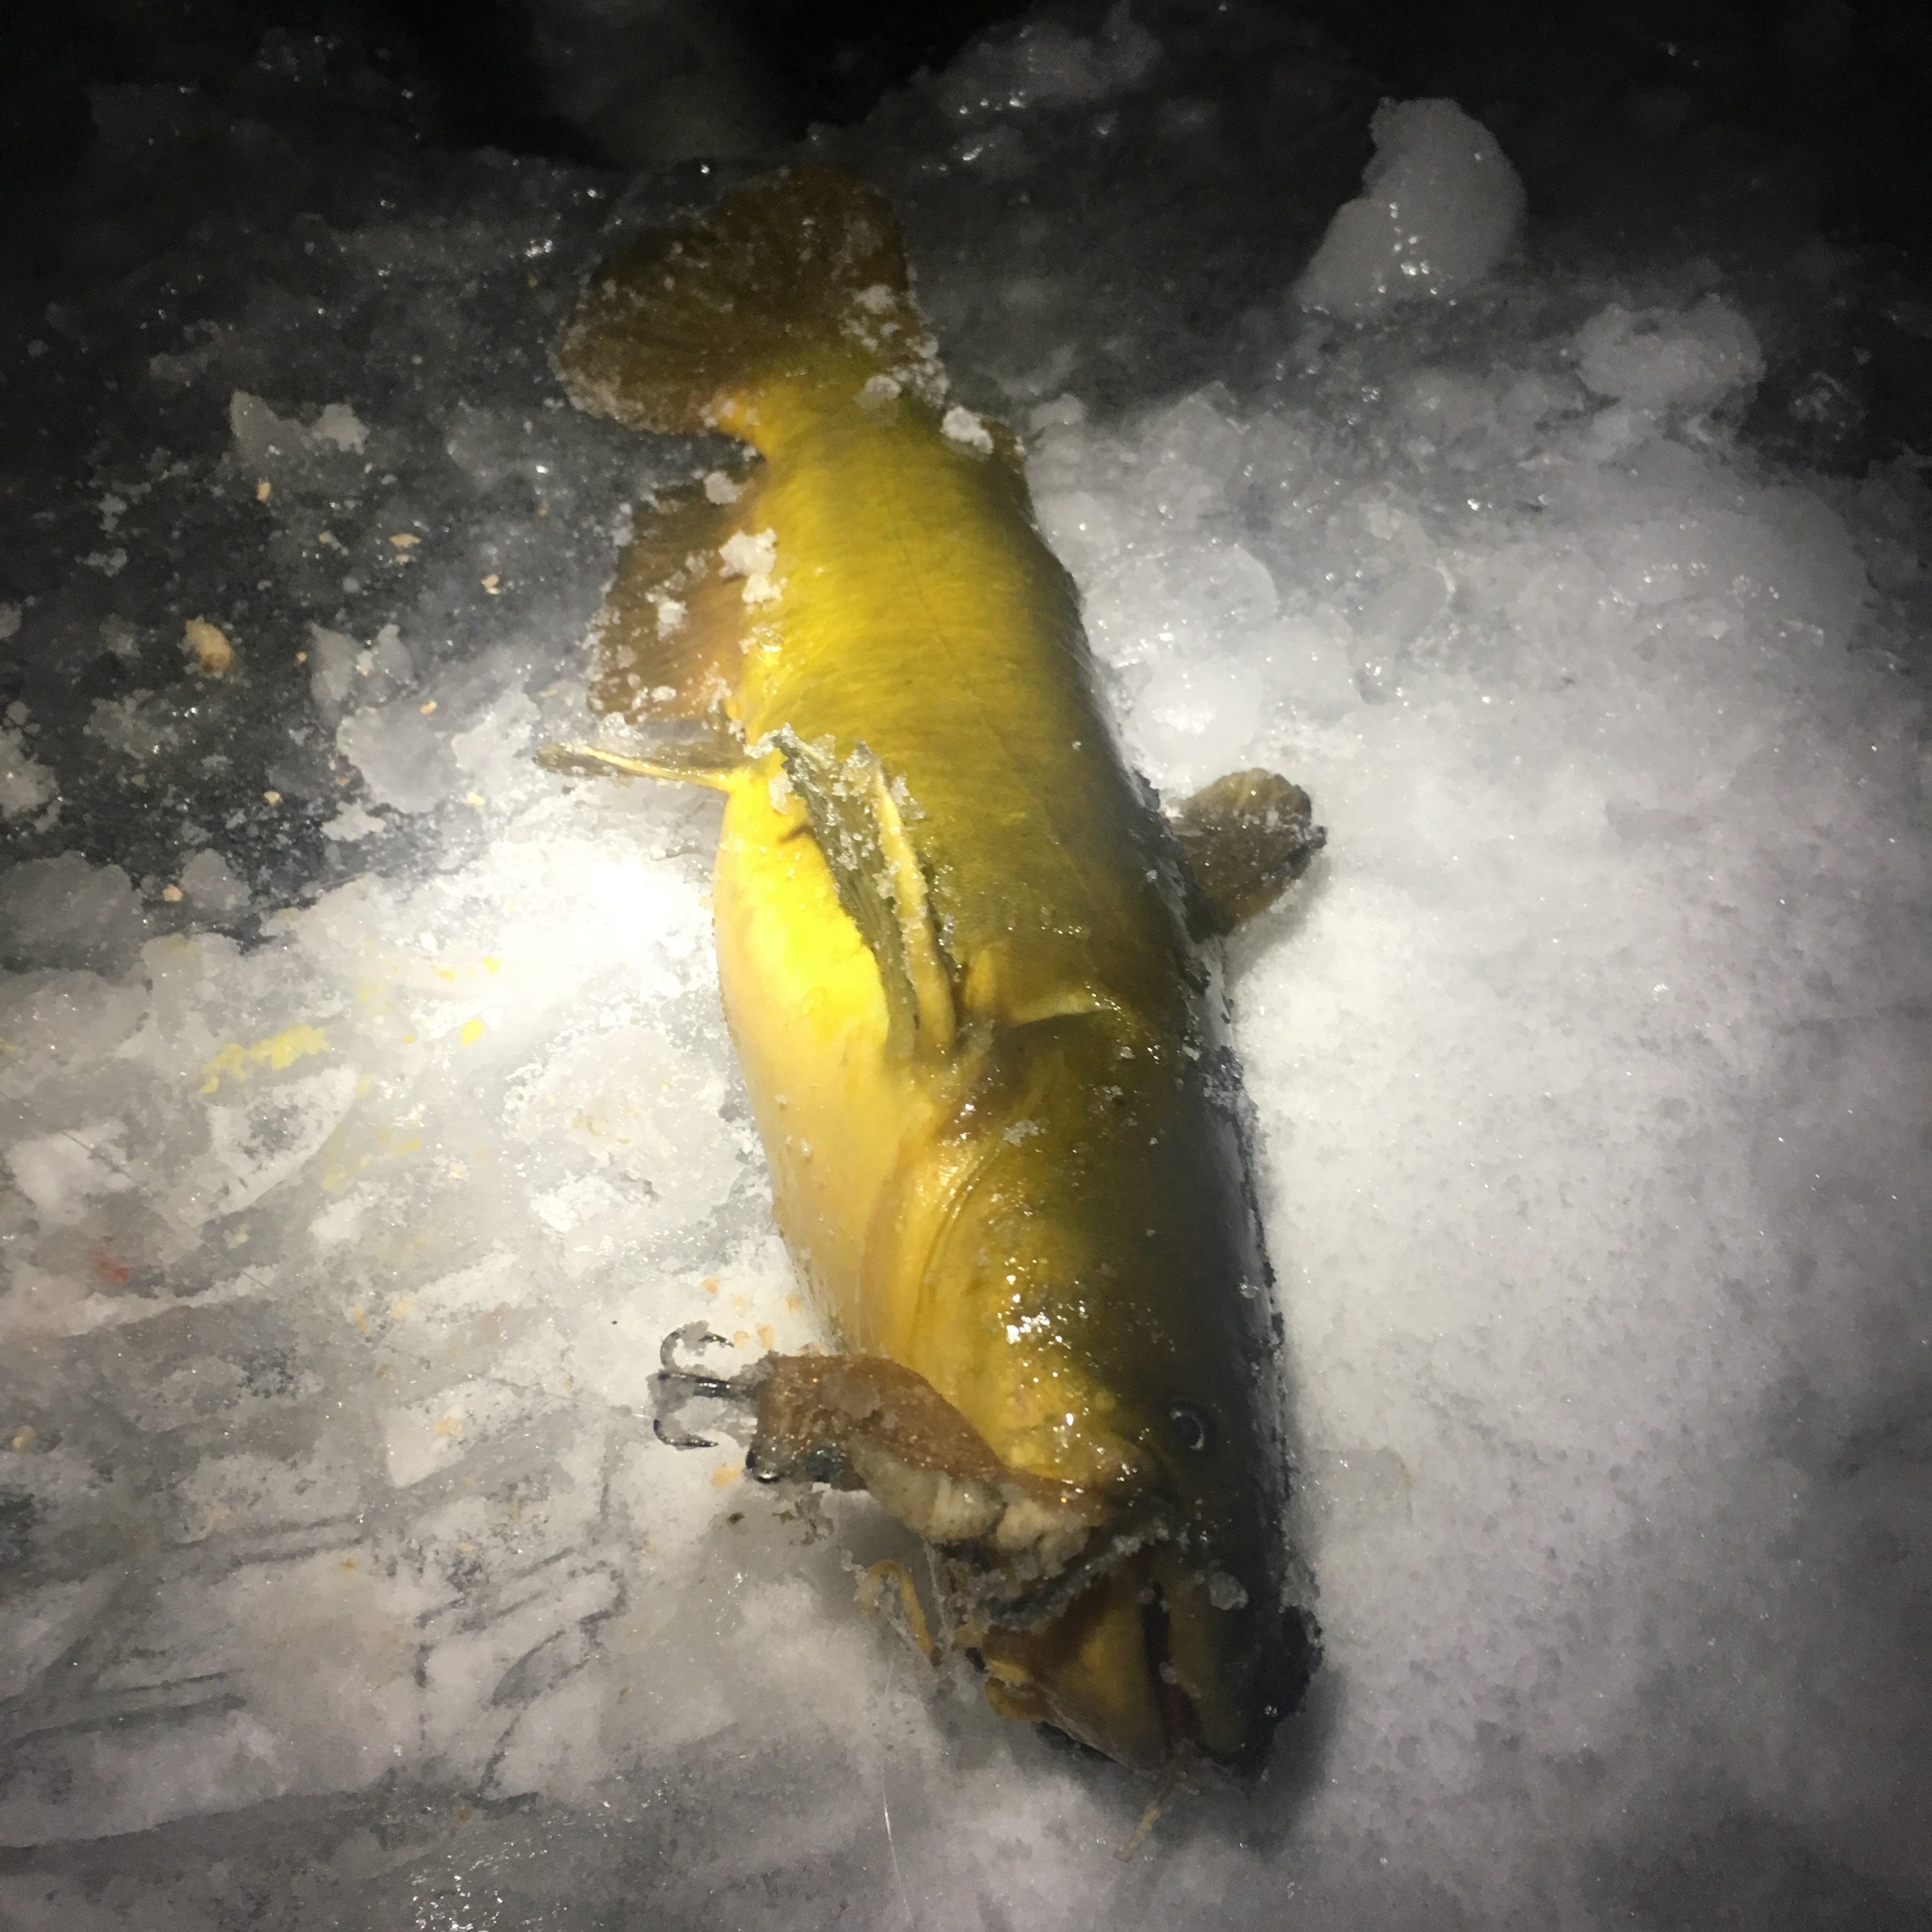 3D Printed ICE CRANK ICE FISHING JIGGING LURE by upscalelures